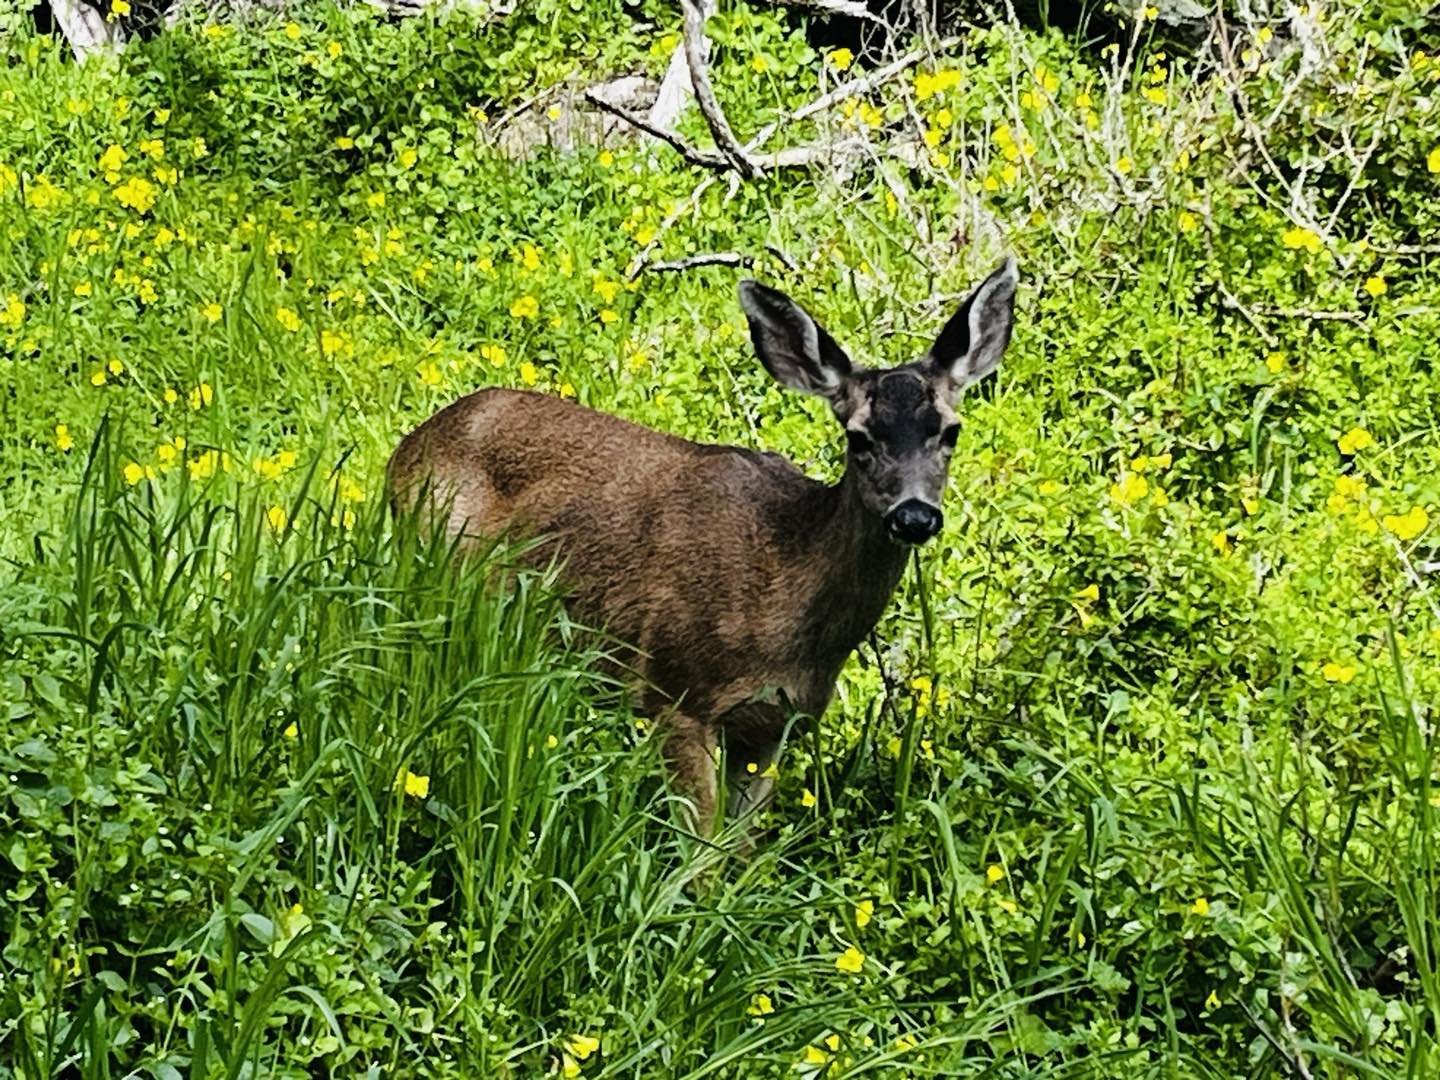 I happened upon this adorable deer at Point Lobos in Carmel last week. 

Deer always remind me of how our Abba Daddy cares for us. He is the provider of our needs and delights in every detail of our lives. 

He KNOWS you. 
He KNOWS what concerns you.